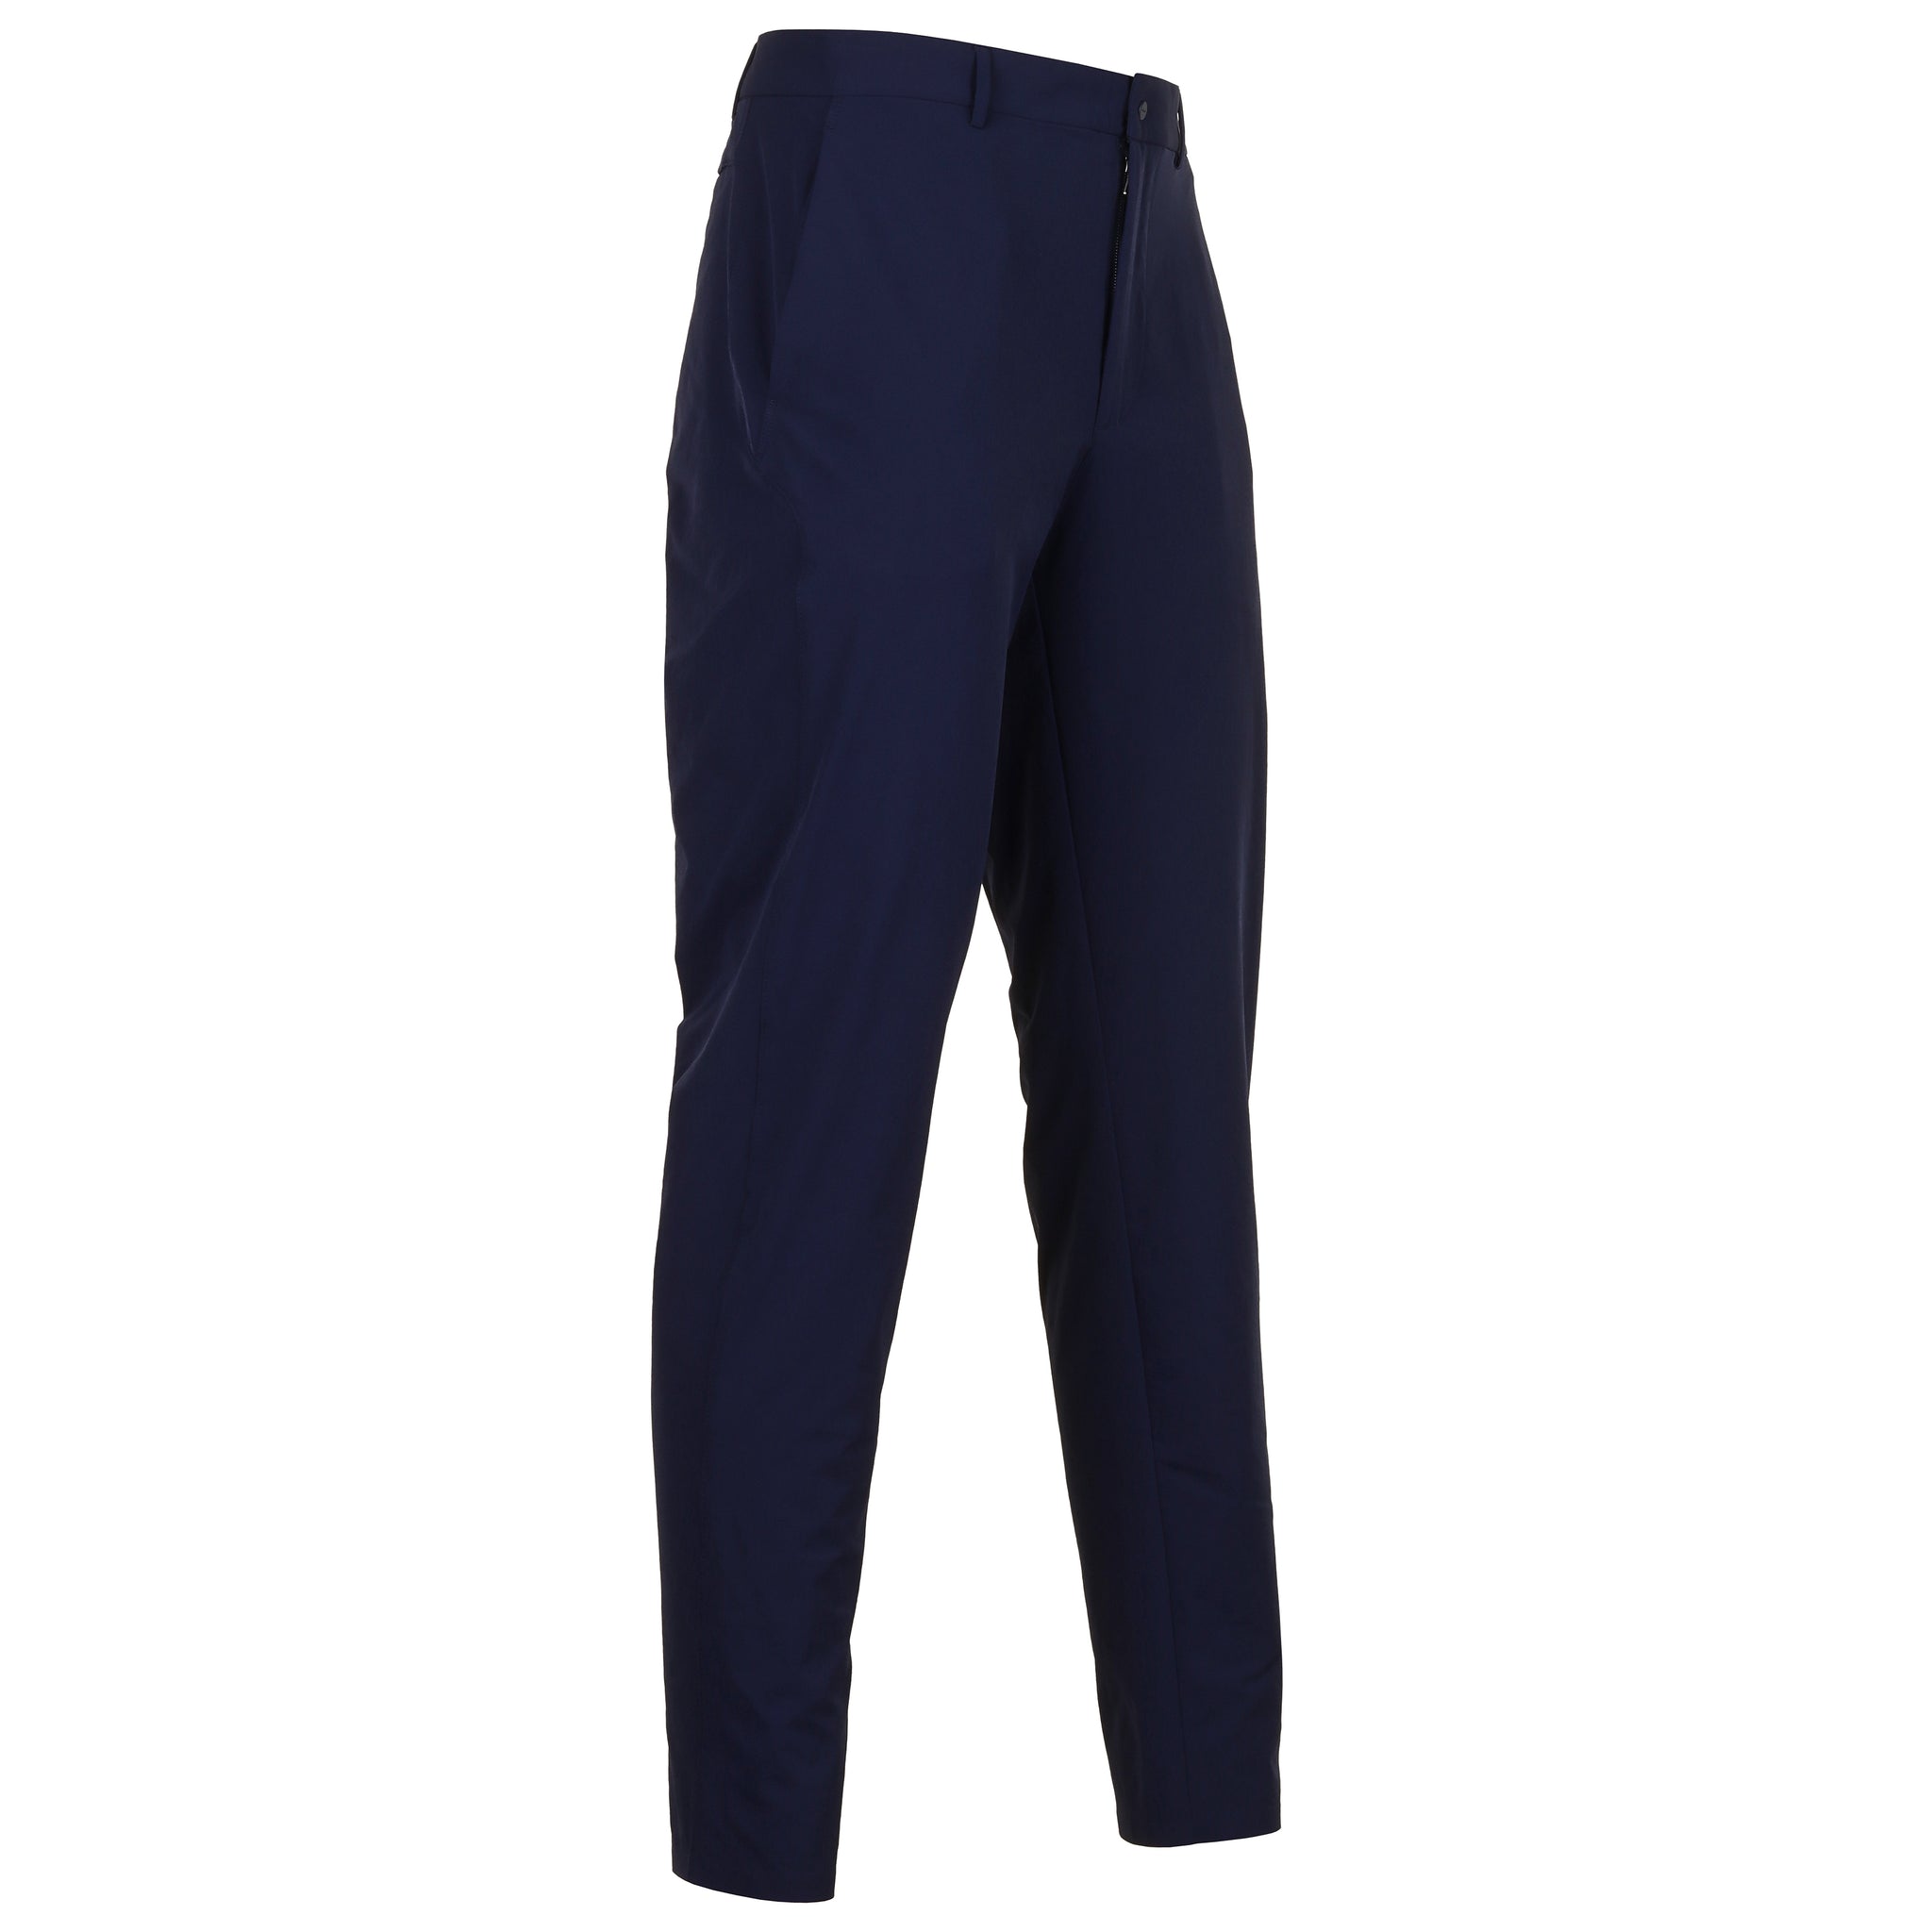 rlx-ralph-lauren-on-course-trousers-785927990-refined-navy-003